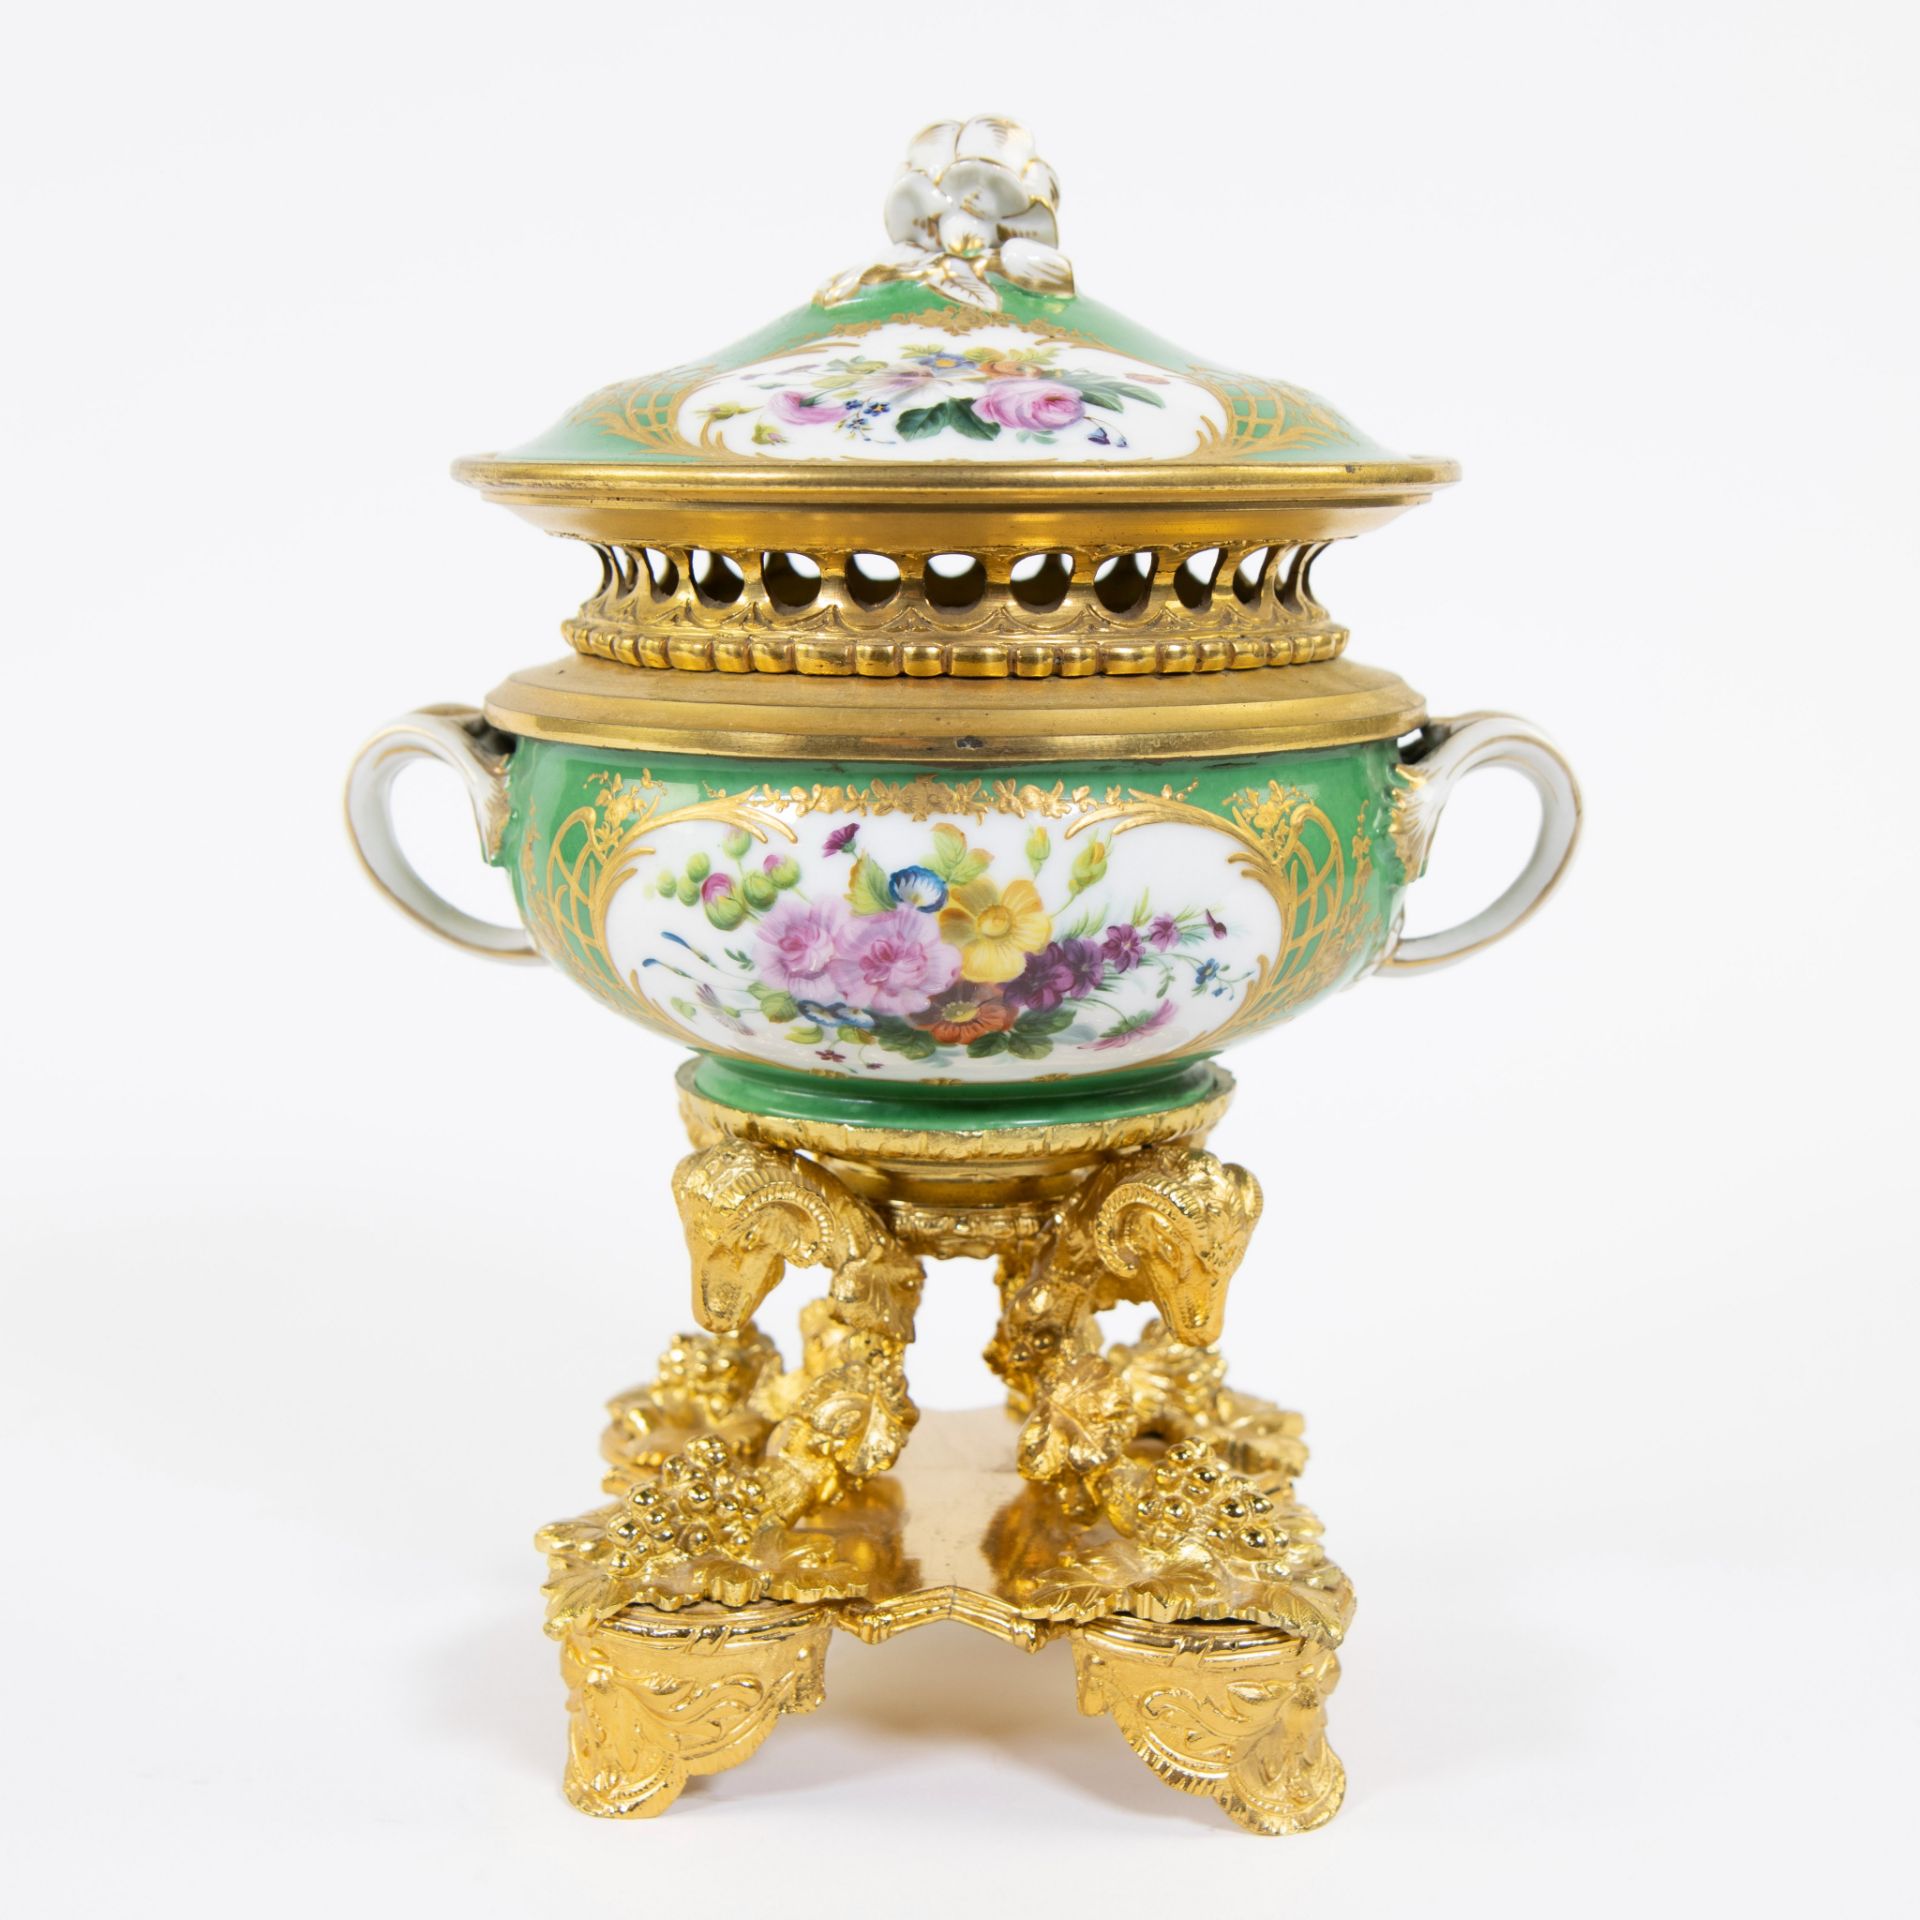 Porcelain table piece with gilt bronze fittings of rams' heads and bunches of grapes. Handpainted wi - Image 4 of 7